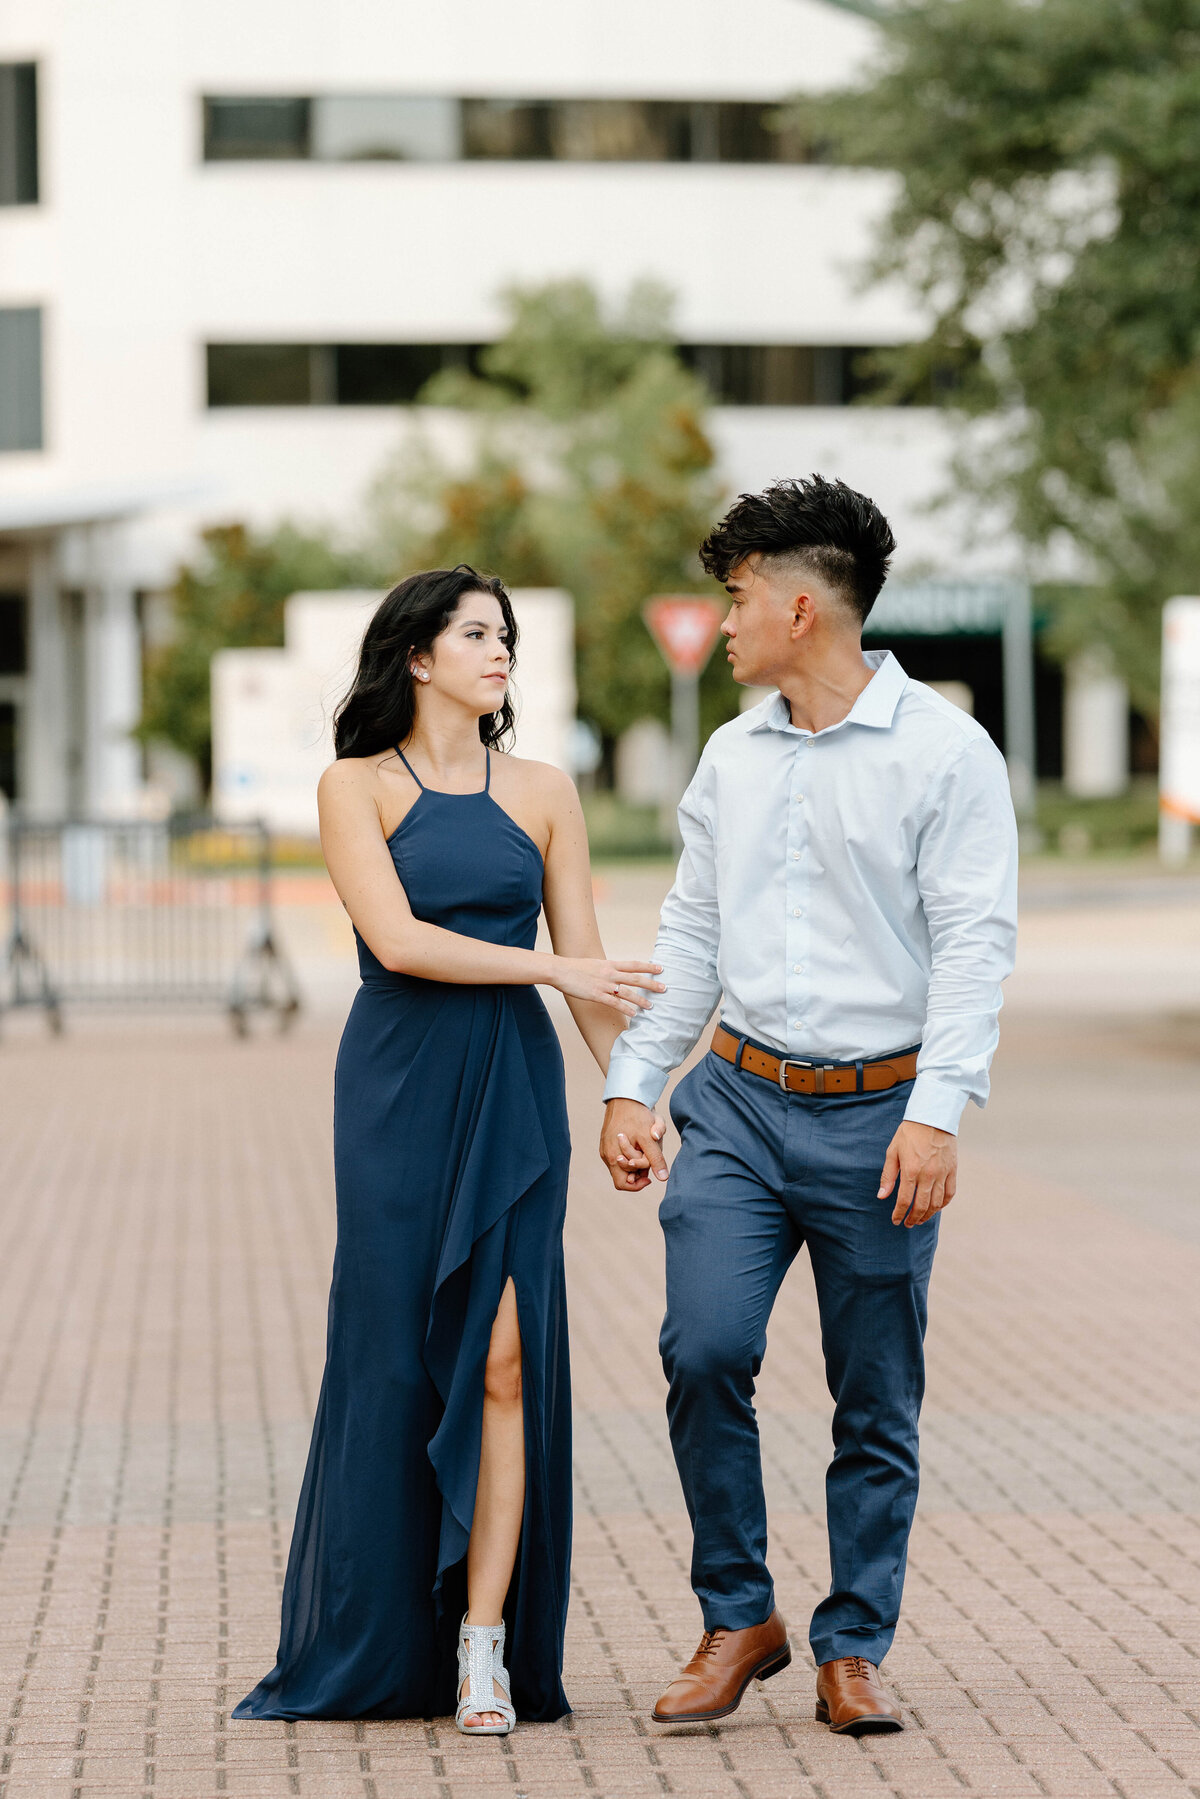 Downtown*beaumont_couples Session-Courtney LaSalle Photography